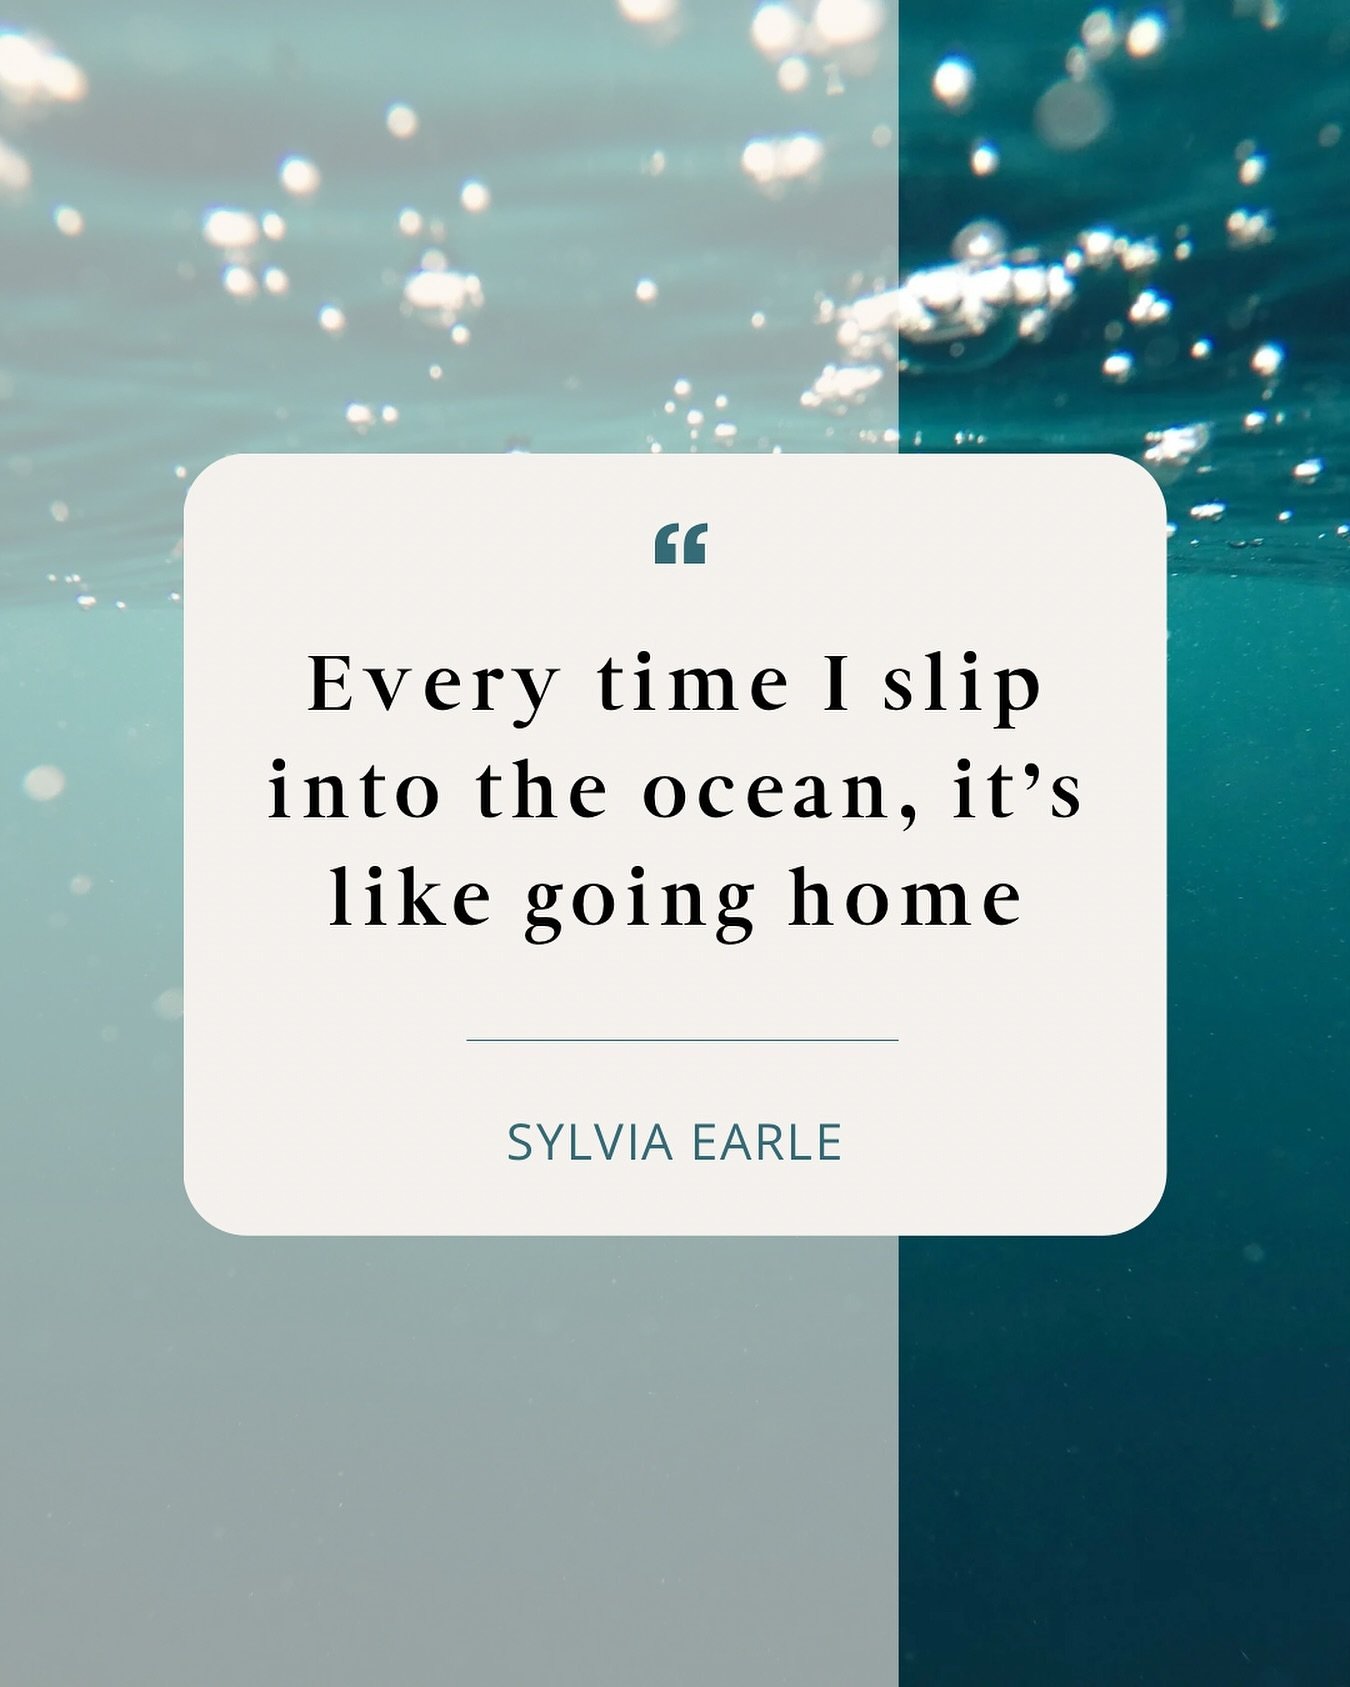 &ldquo;Every time I slip into the ocean, it&rsquo;s like going home&rdquo;

Sylvia Earle&rsquo;s words resonate deeply with the sense of homecoming we feel when we return to the water 🌊

Every time we return to the ocean, we&rsquo;re reminded of our